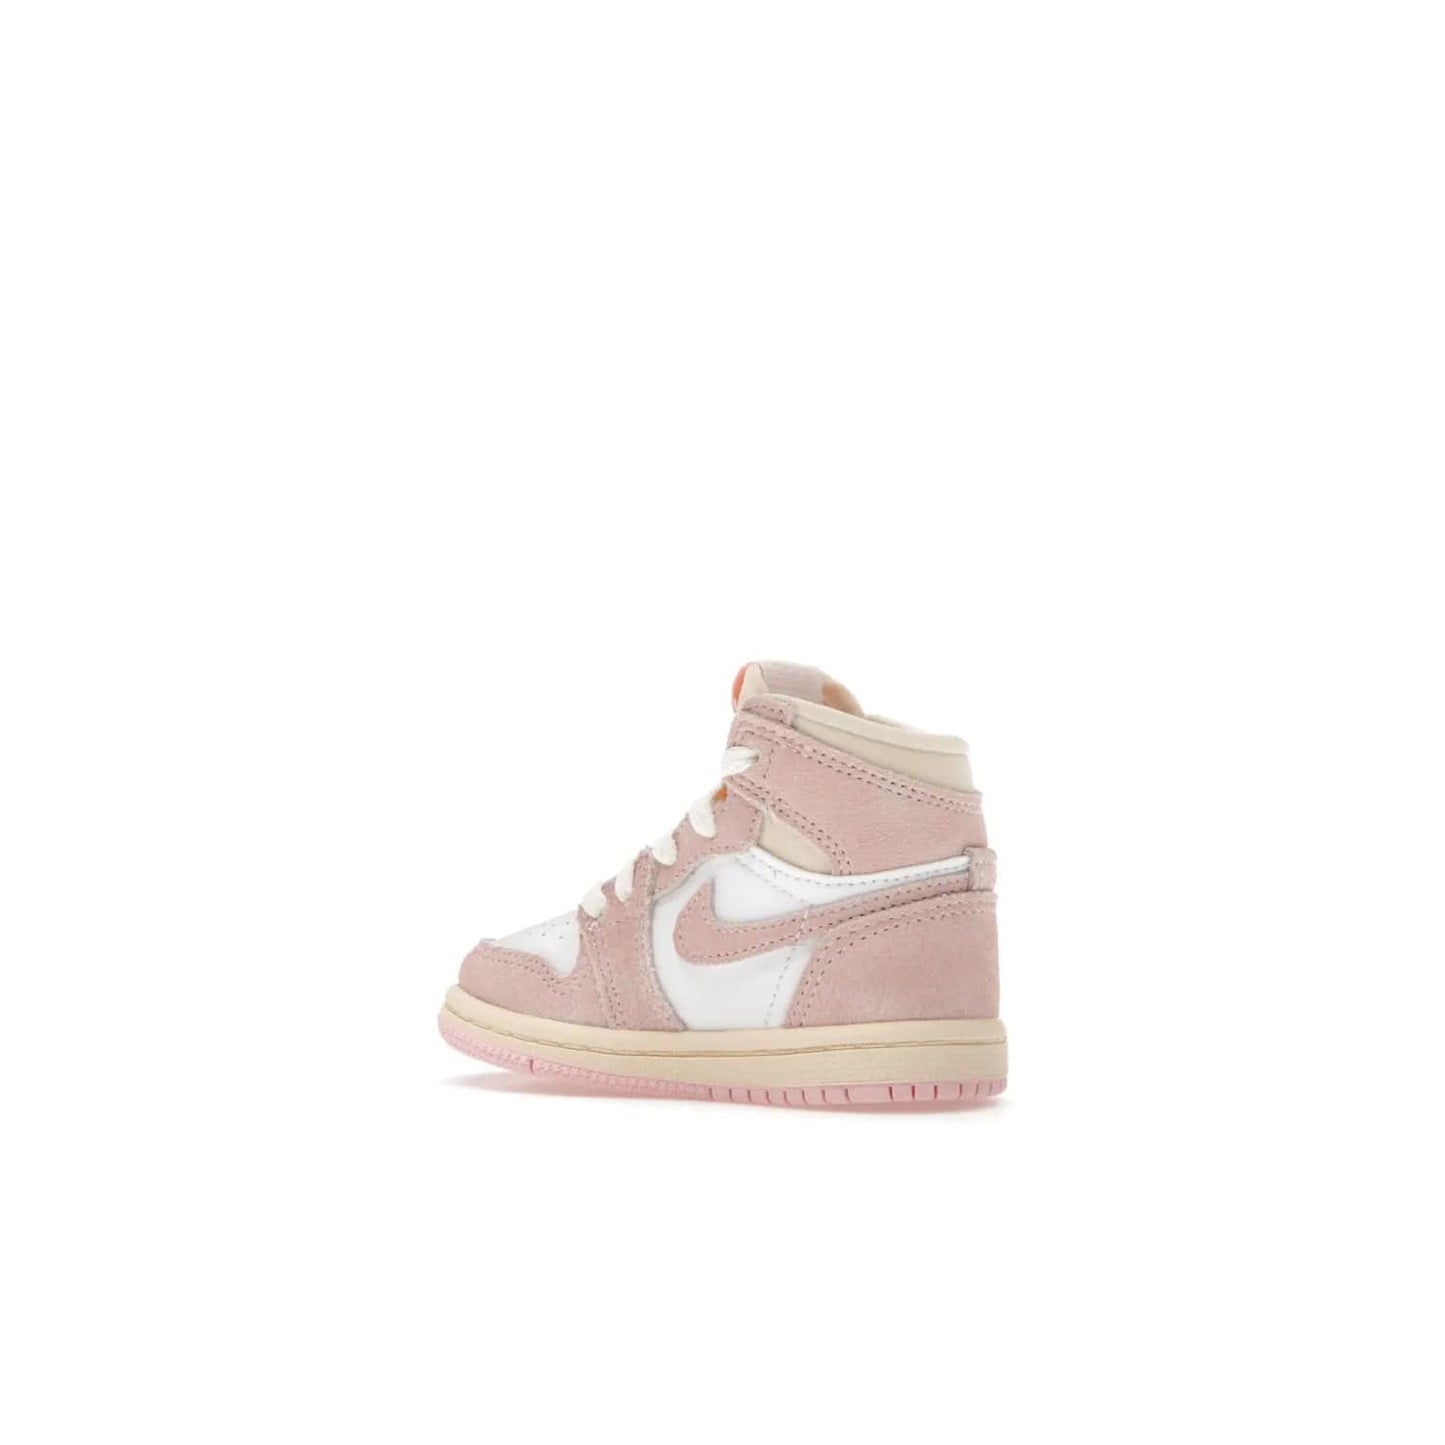 Jordan 1 Retro High OG Washed Pink (TD) - Image 22 - Only at www.BallersClubKickz.com - Retro style meets modern comfort: Introducing the Jordan 1 High OG Washed Pink (TD). Combining Atmosphere/White/Muslin/Sail colors with a high-rise silhouette, these shoes will be an instant classic when they release April 22, 2023.